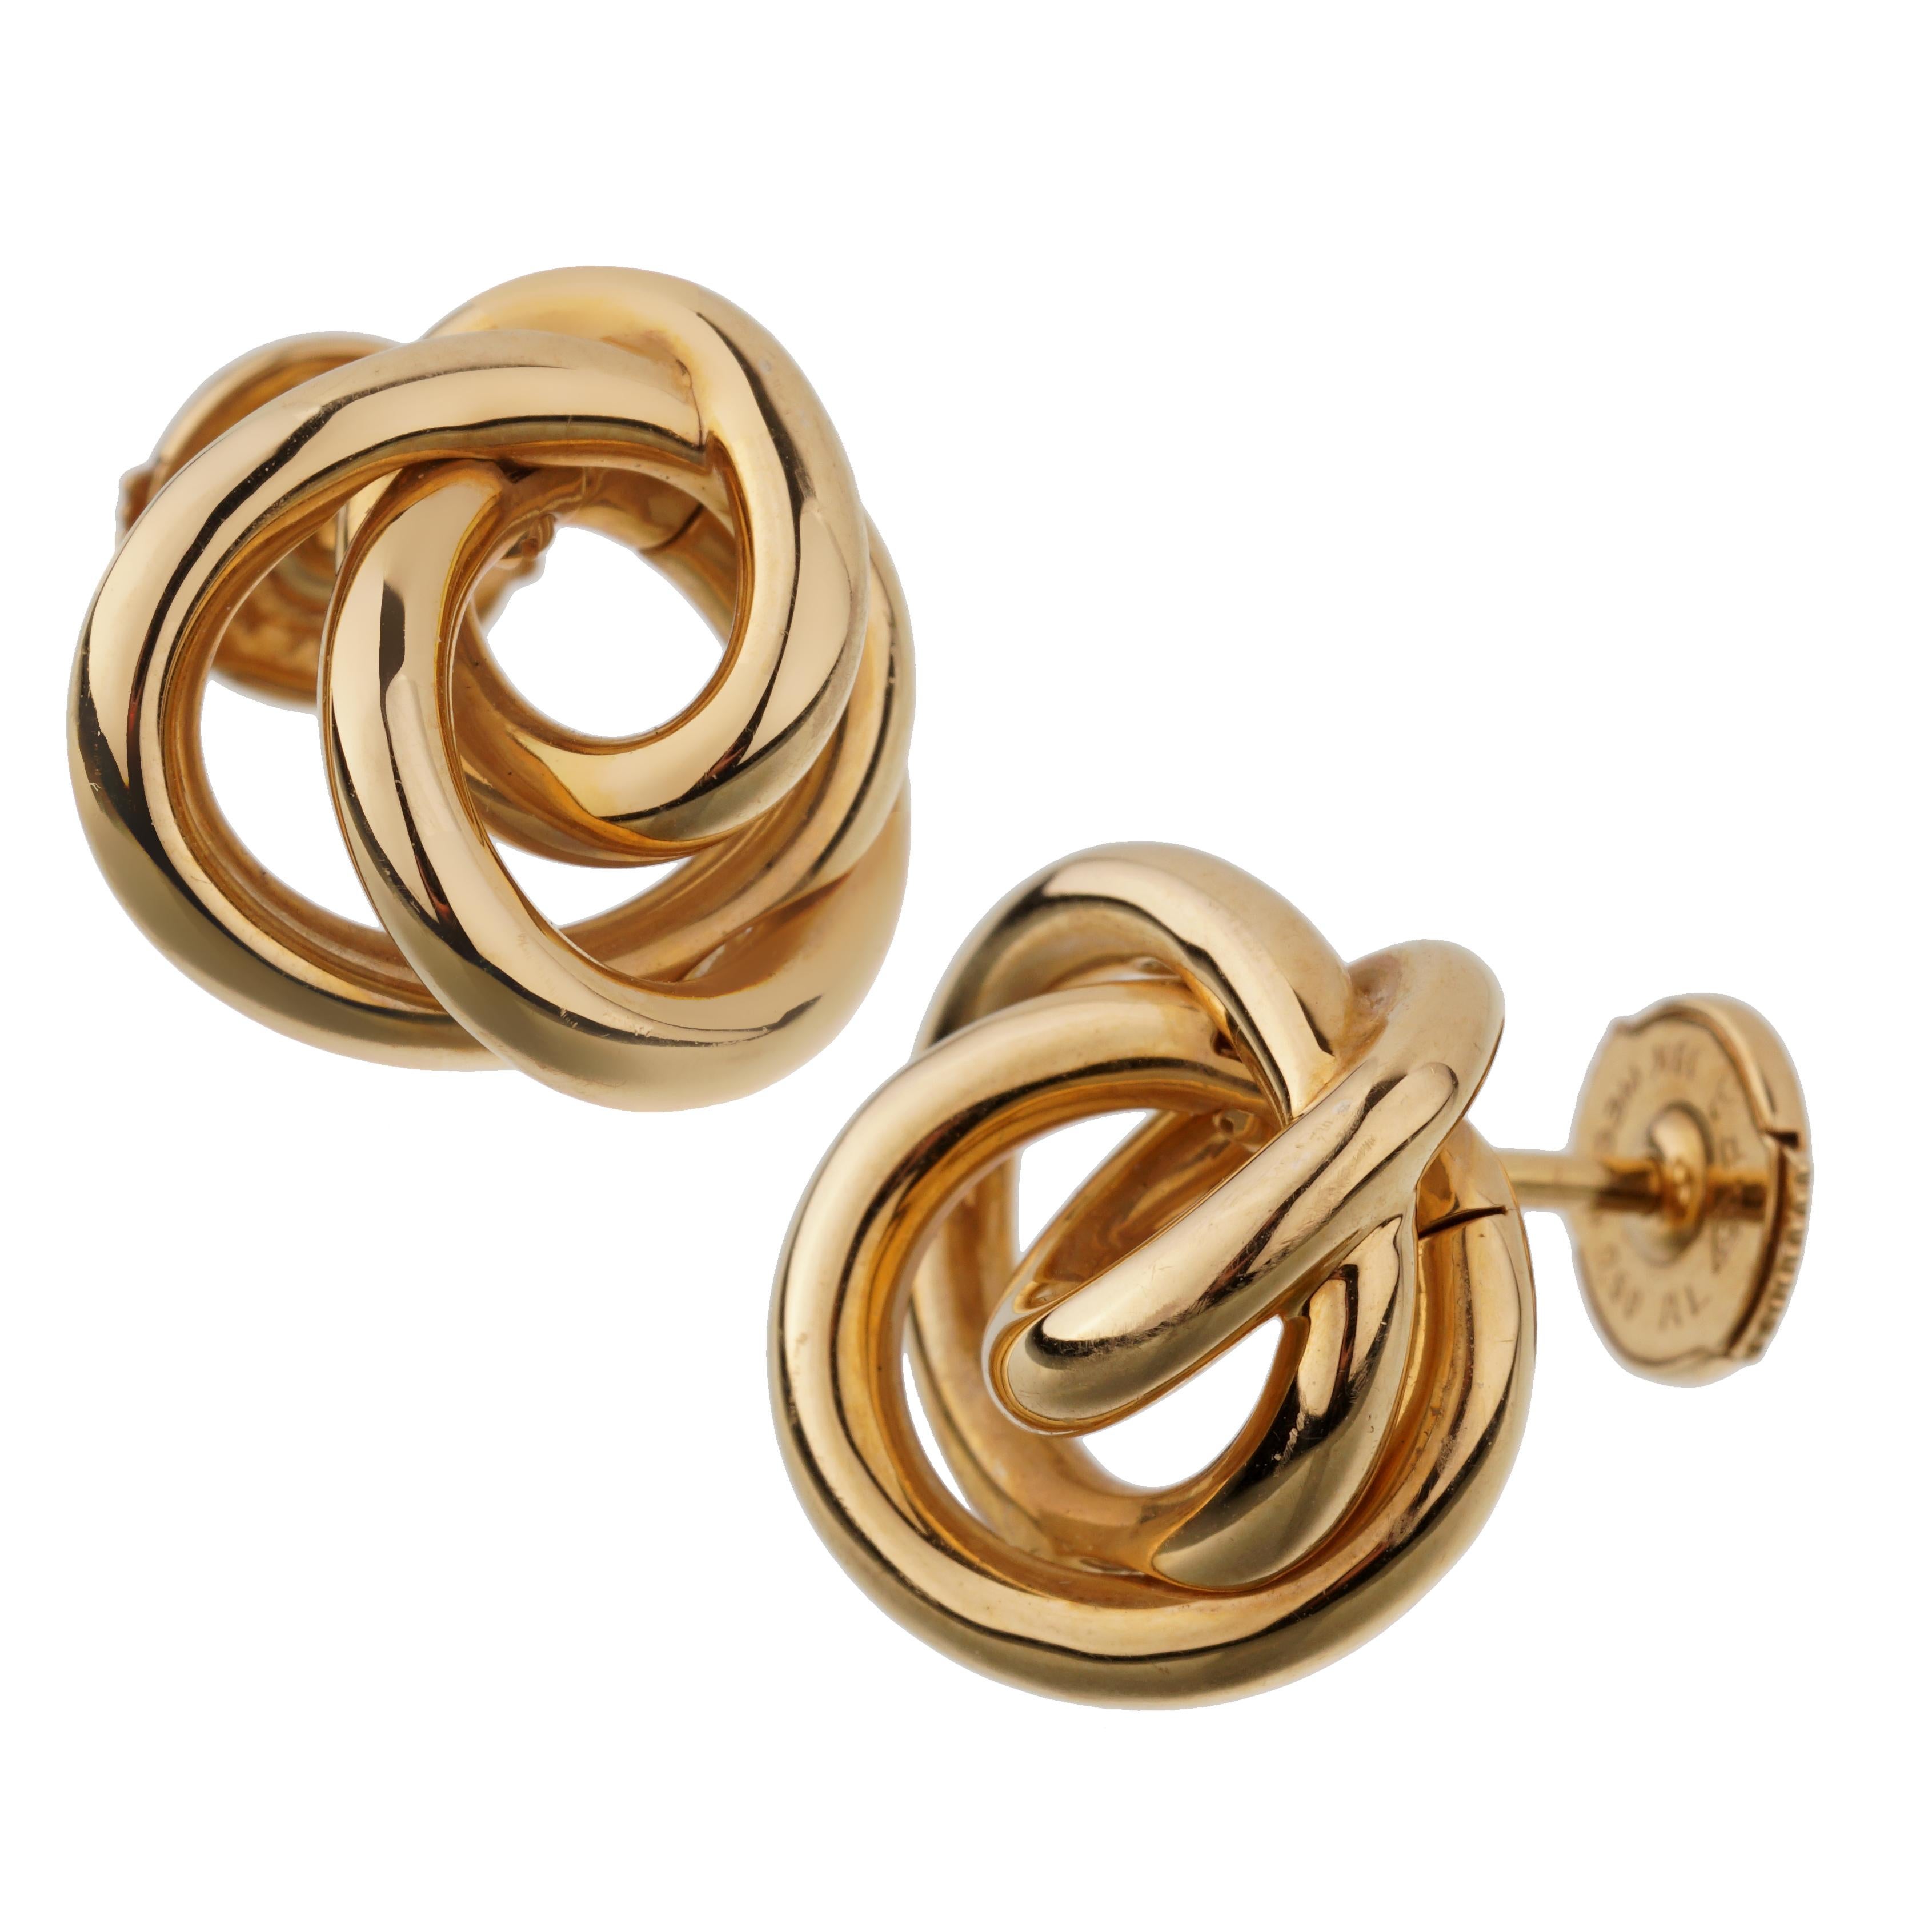 A fabulous earring by De Grisogono showcasing a love knot in 18k rose gold, The earrings feature safety backing enclosures for a timeless pair of everyday earrings.
The earrings measure .62